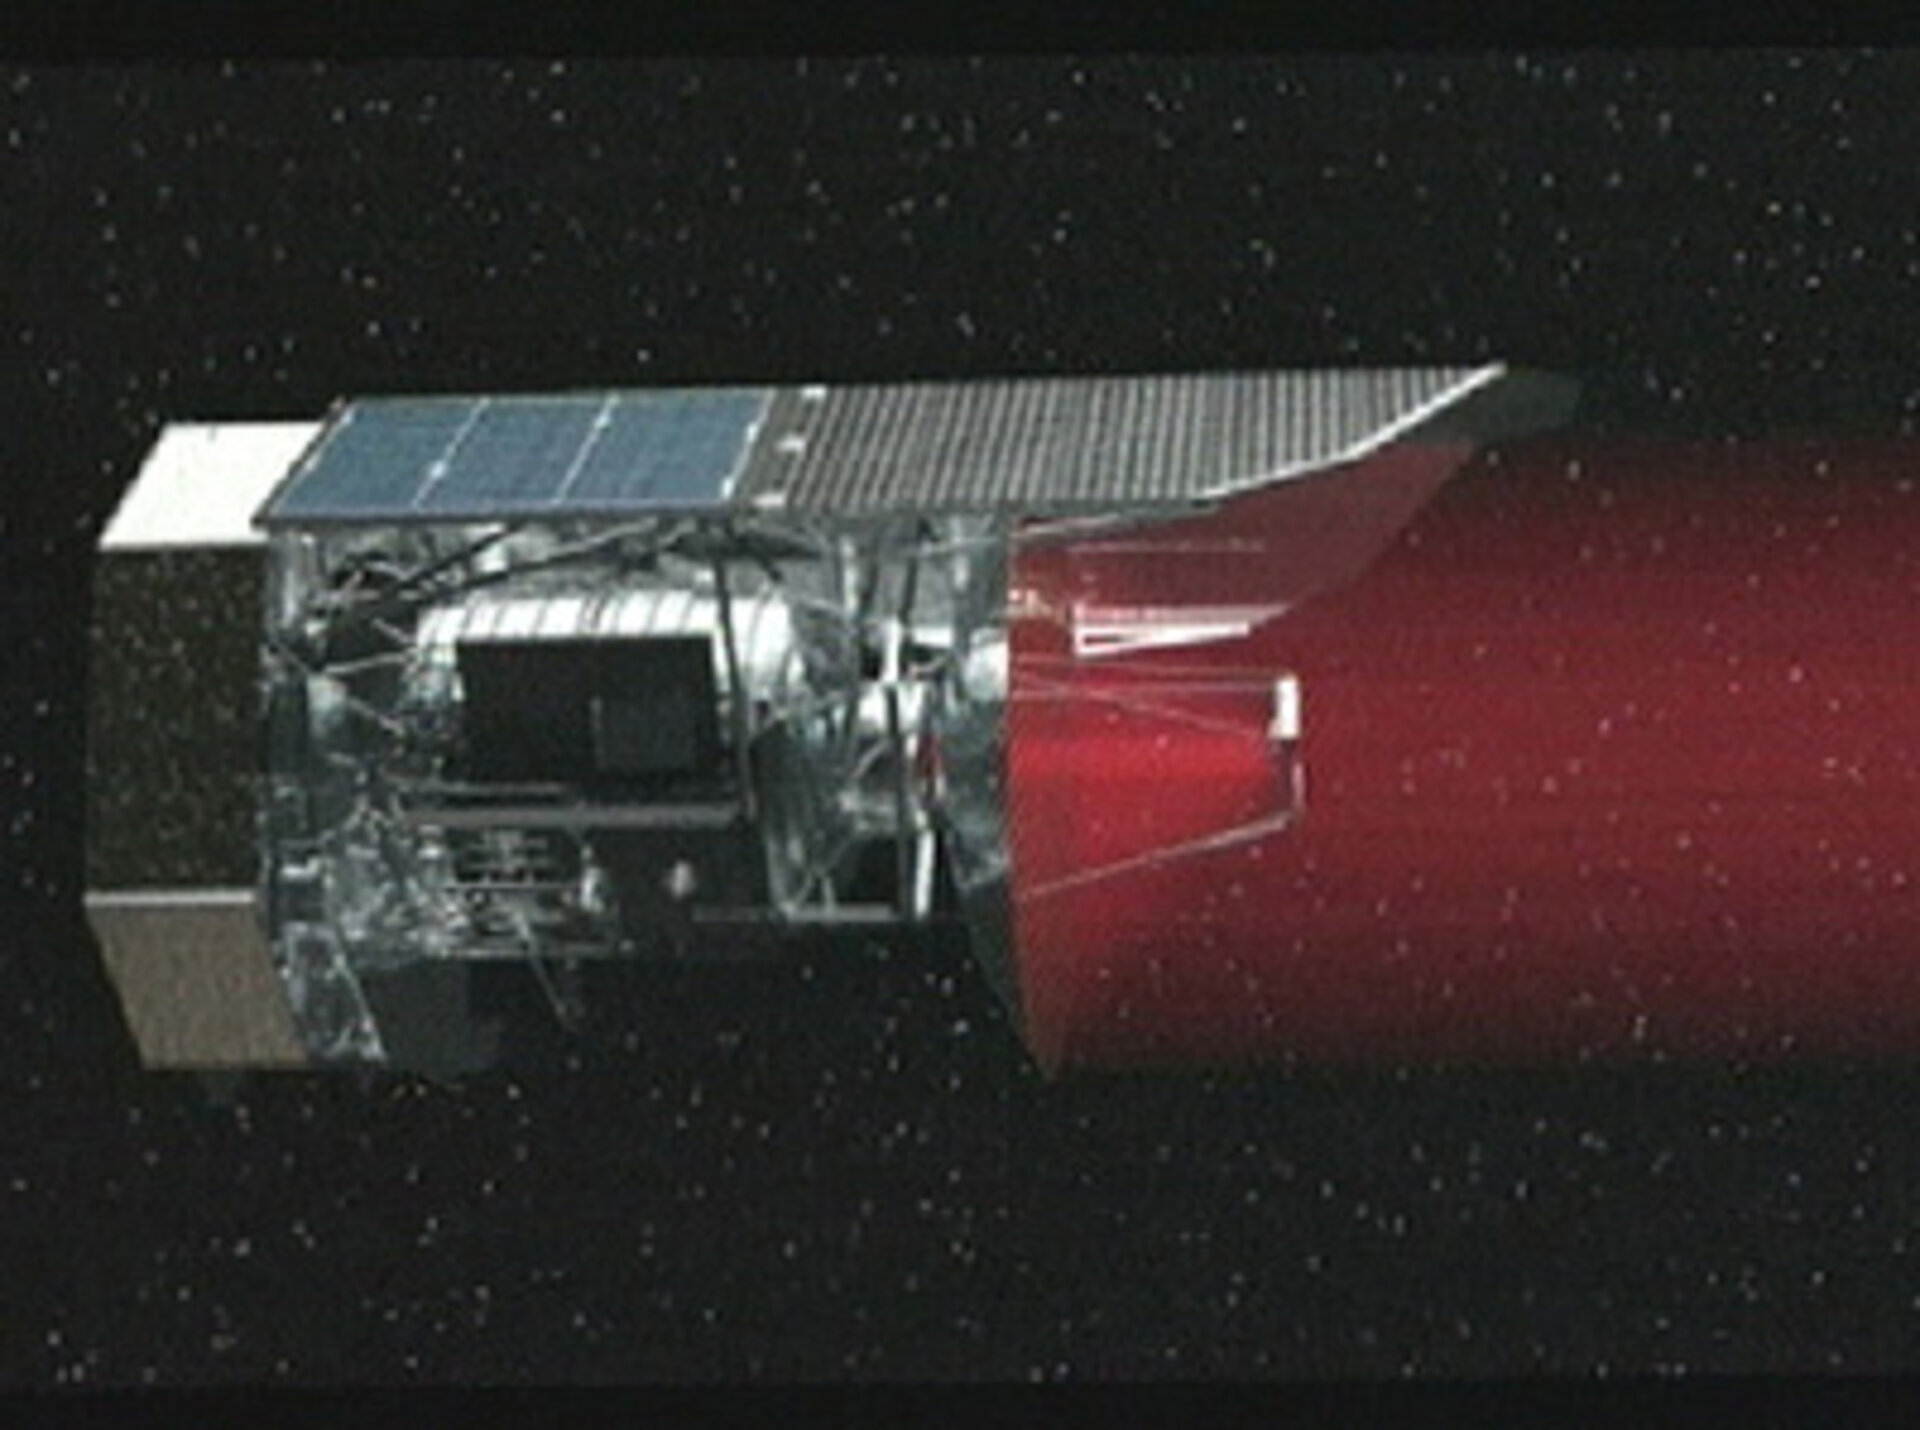 The Herschel observatory is scheduled for launch in the second half of 2007